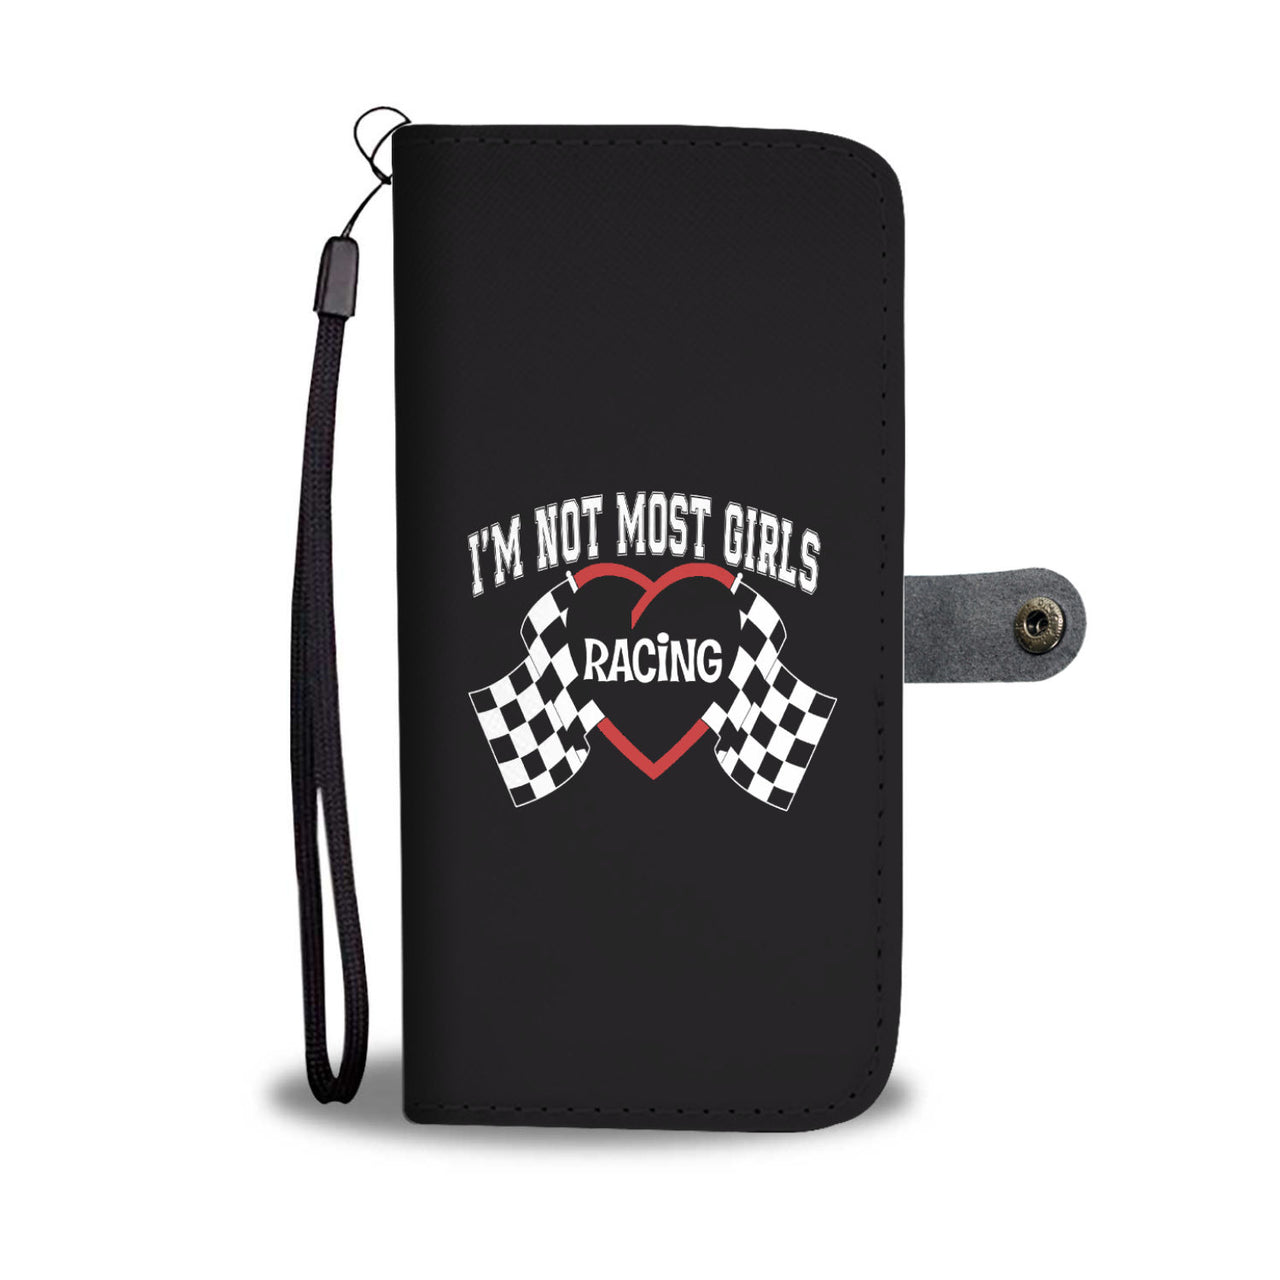 I'm Not Most Girls Racing Wallet Case